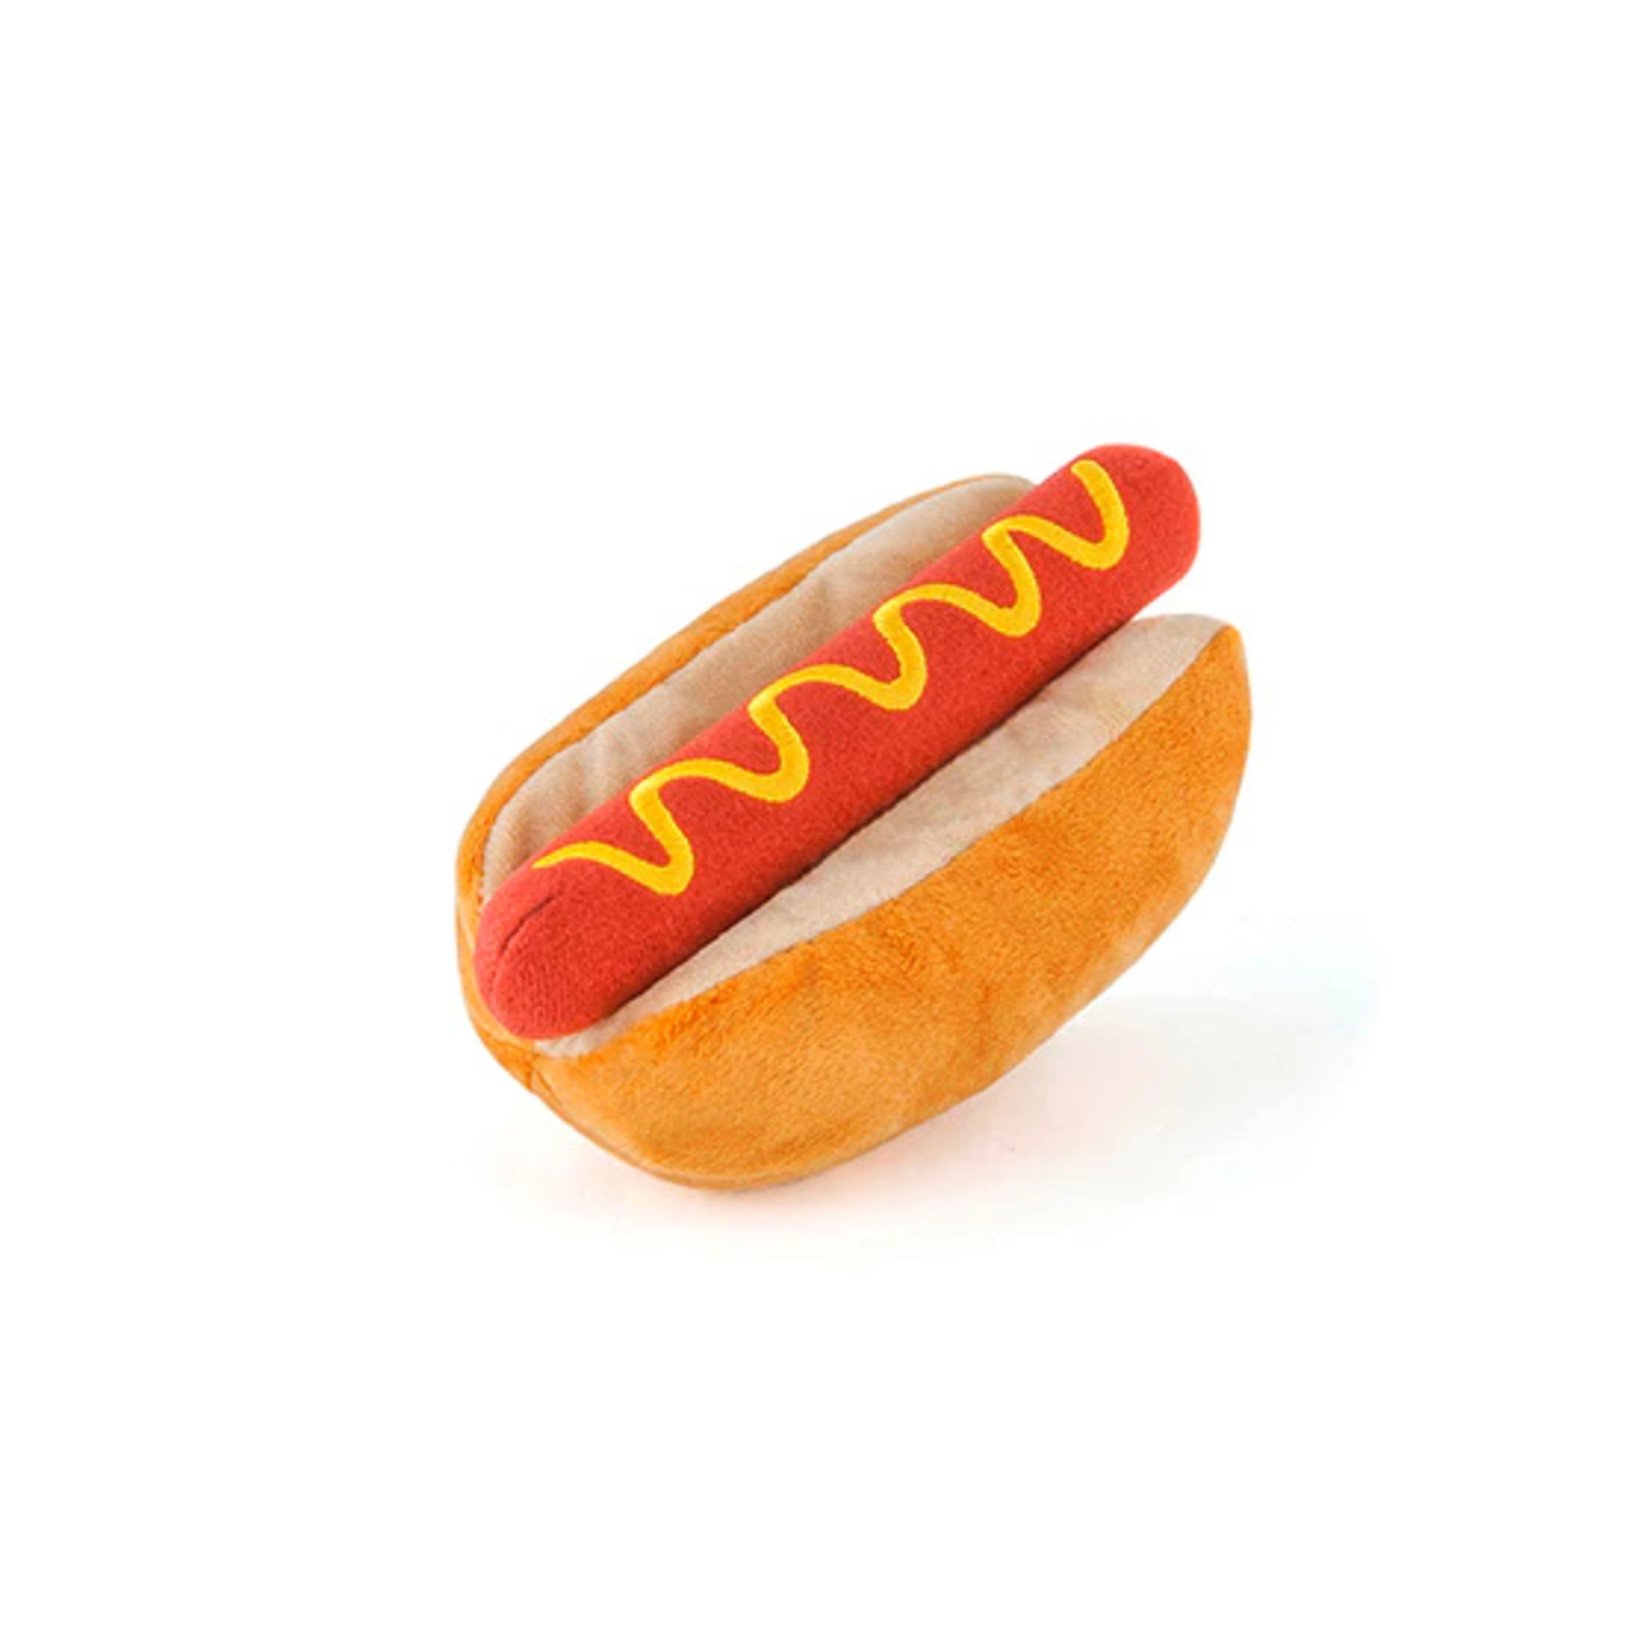 P.L.A.Y. Pet Lifestyle and You P.L.A.Y. American Classic Food Collection - Mini Hot Dog Toy